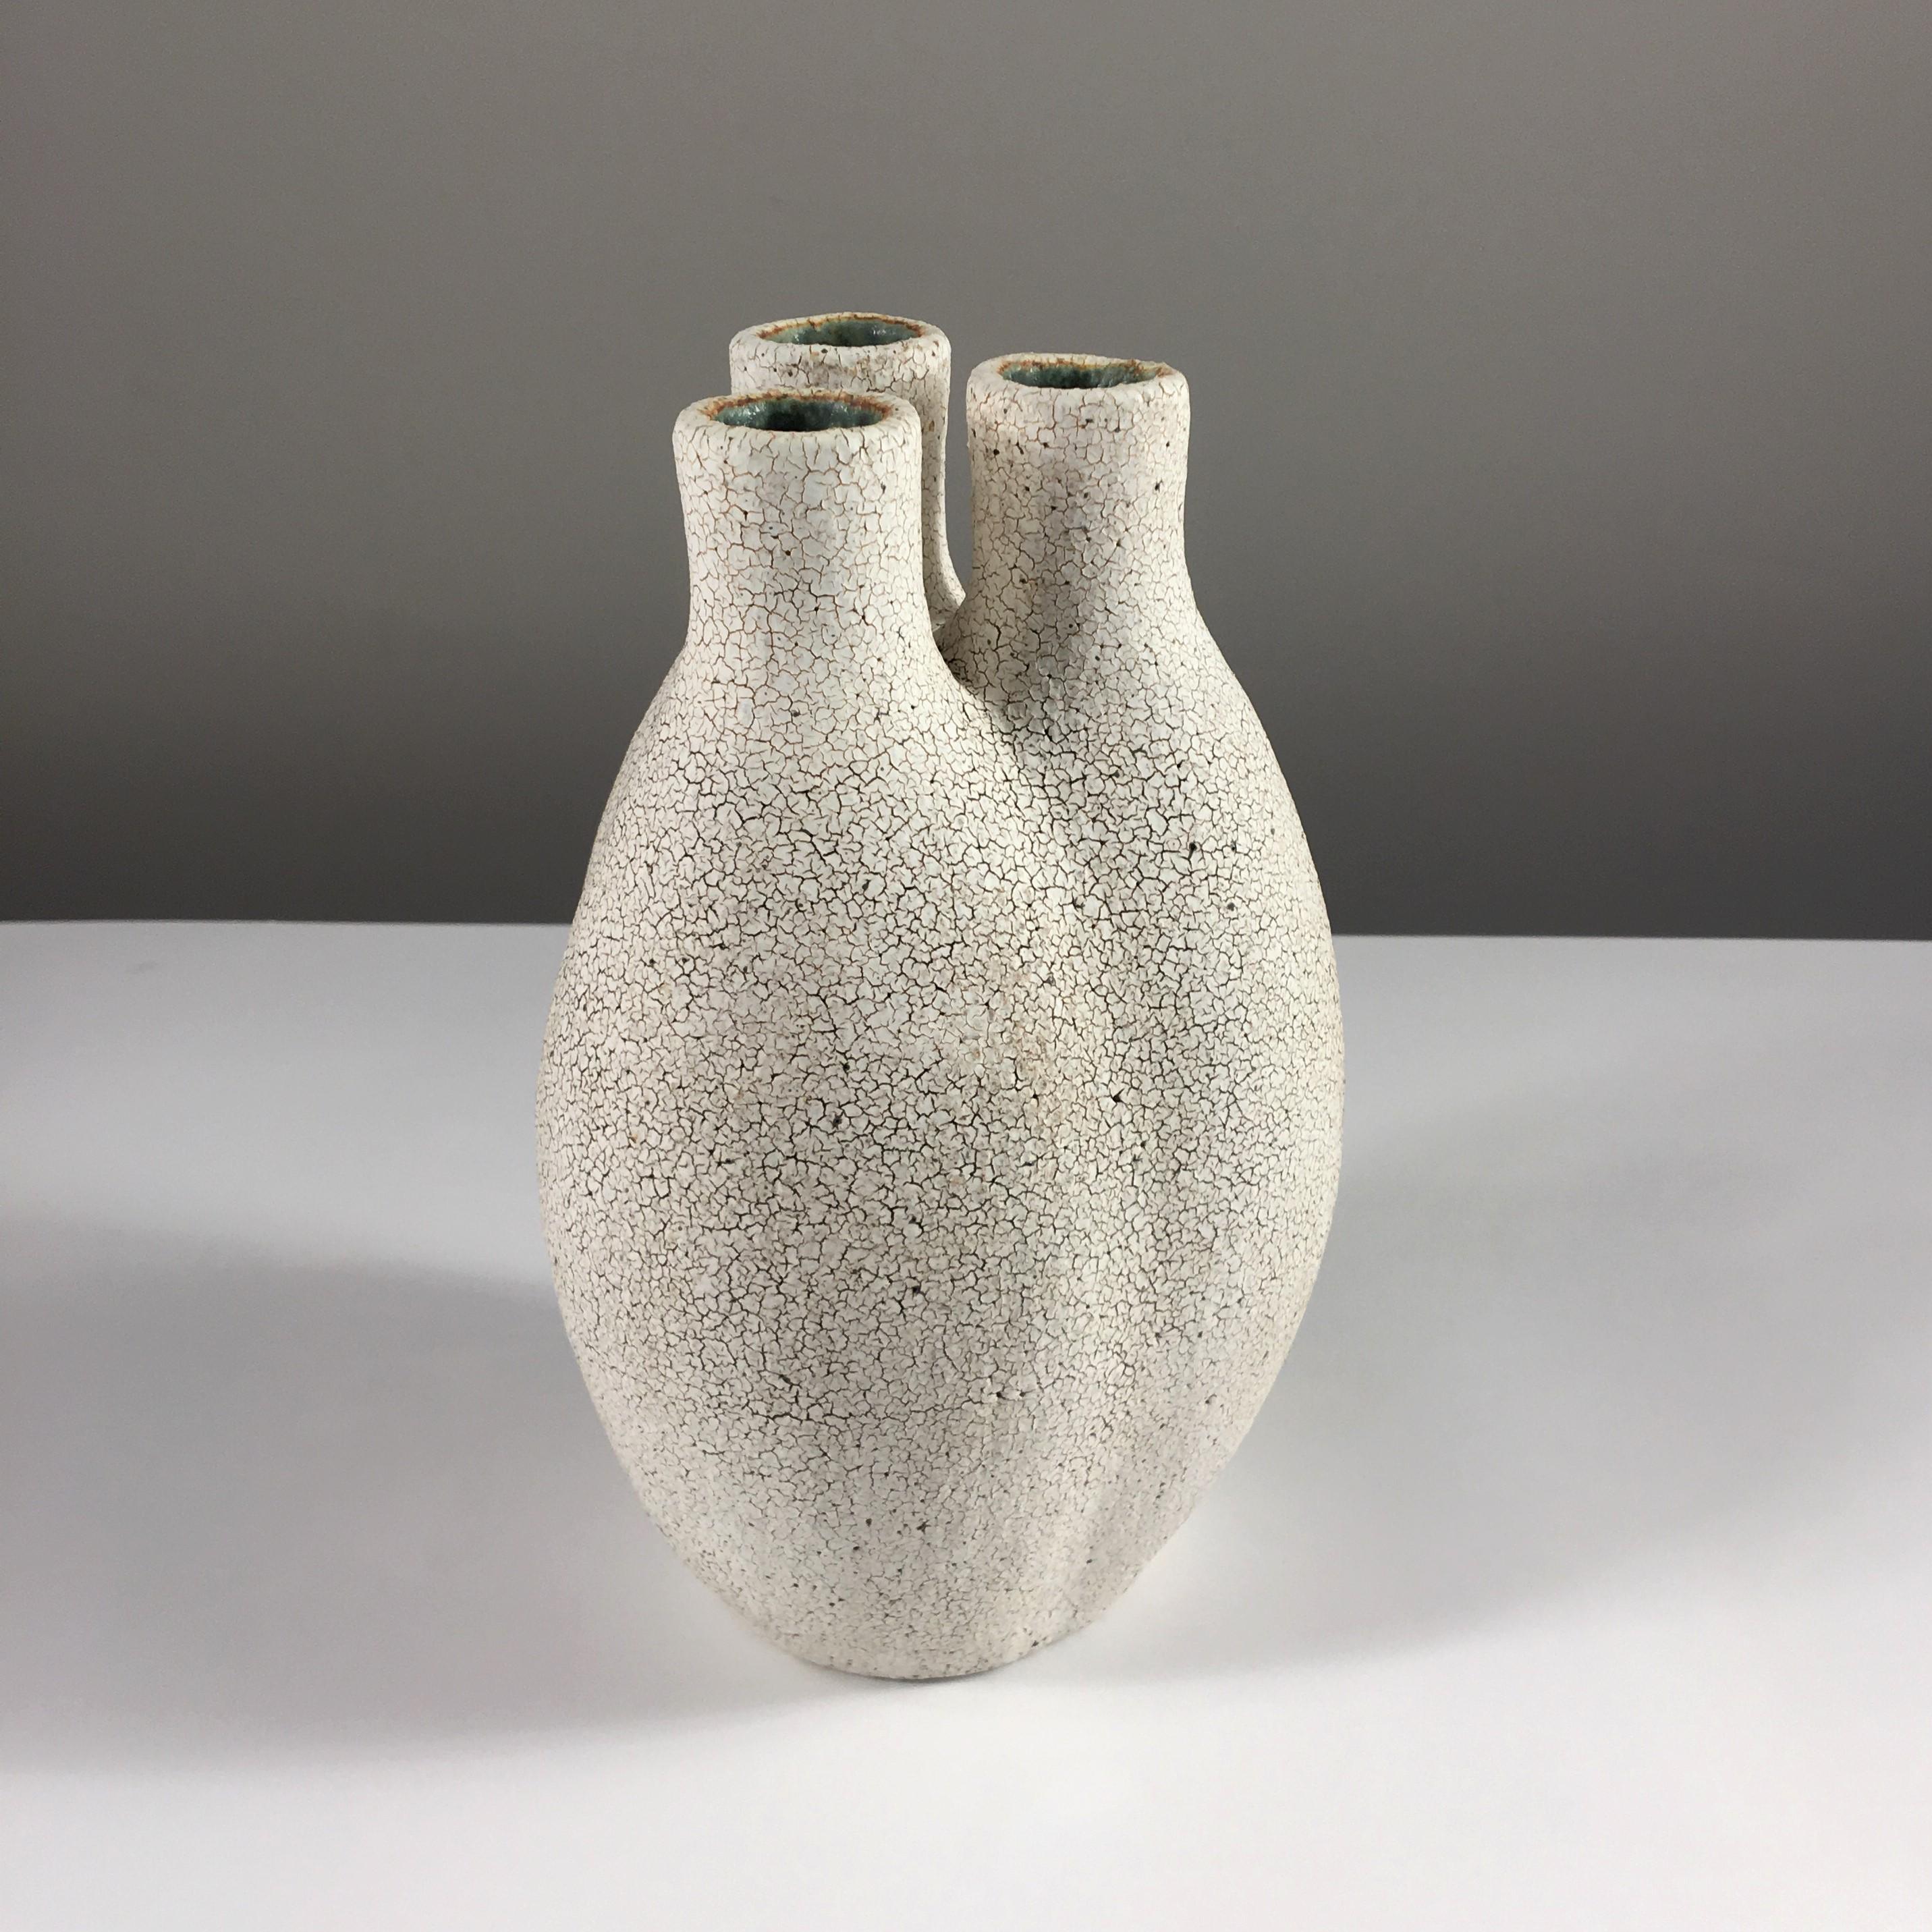 Tri-Neck Pottery Vase by Yumiko Kuga.  Dimensions: Height 8